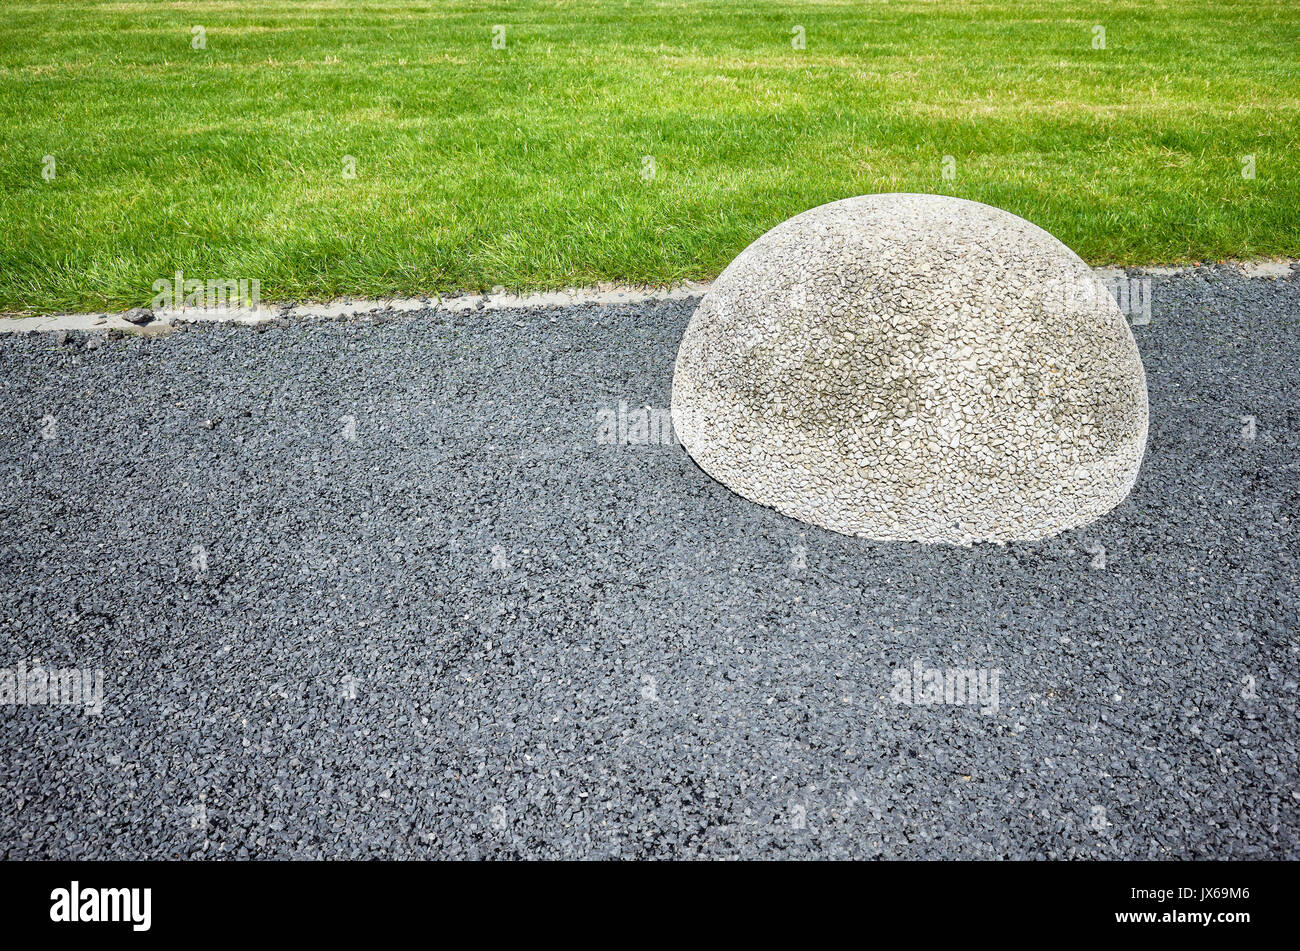 Abstract background made of asphalt floor, lawn and hemisphere barrier. Stock Photo